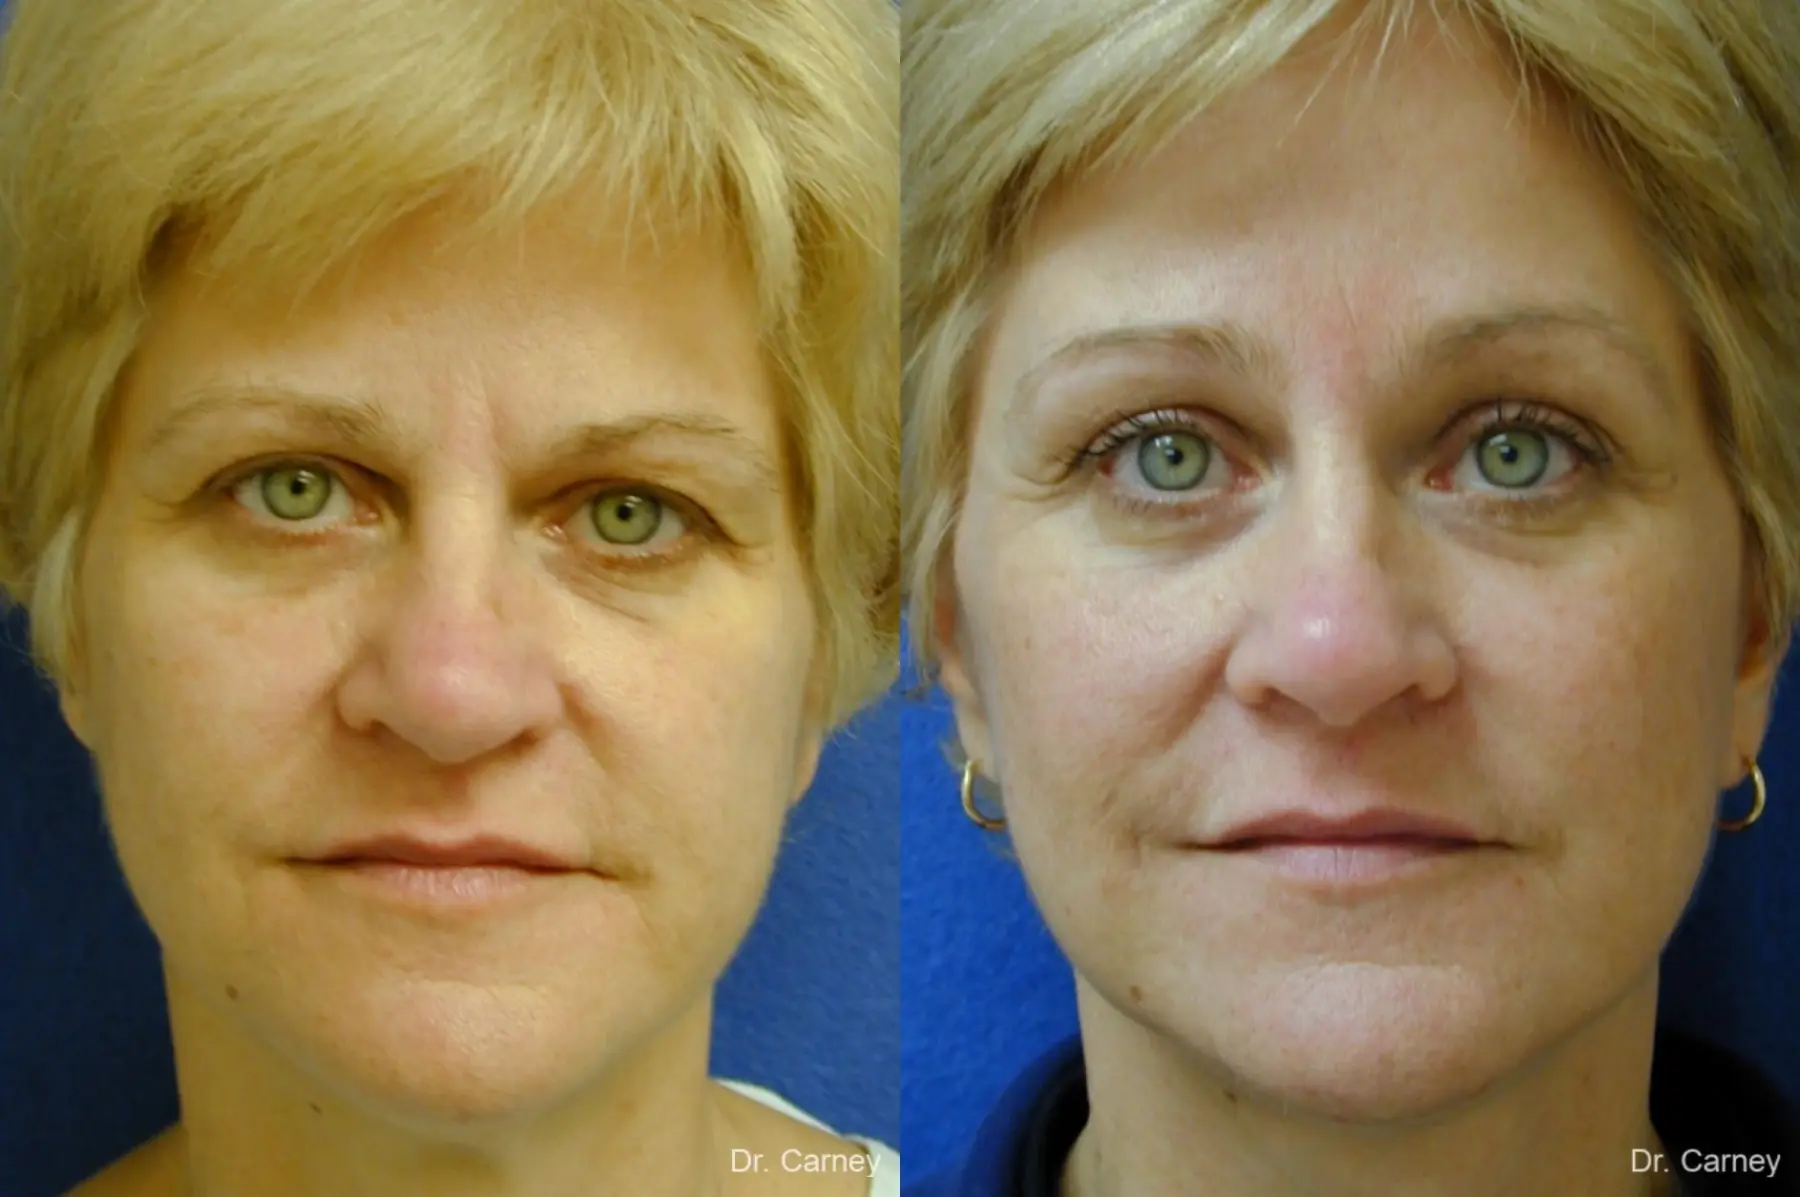 Virginia Beach Eyelid Lift 1344 - Before and After